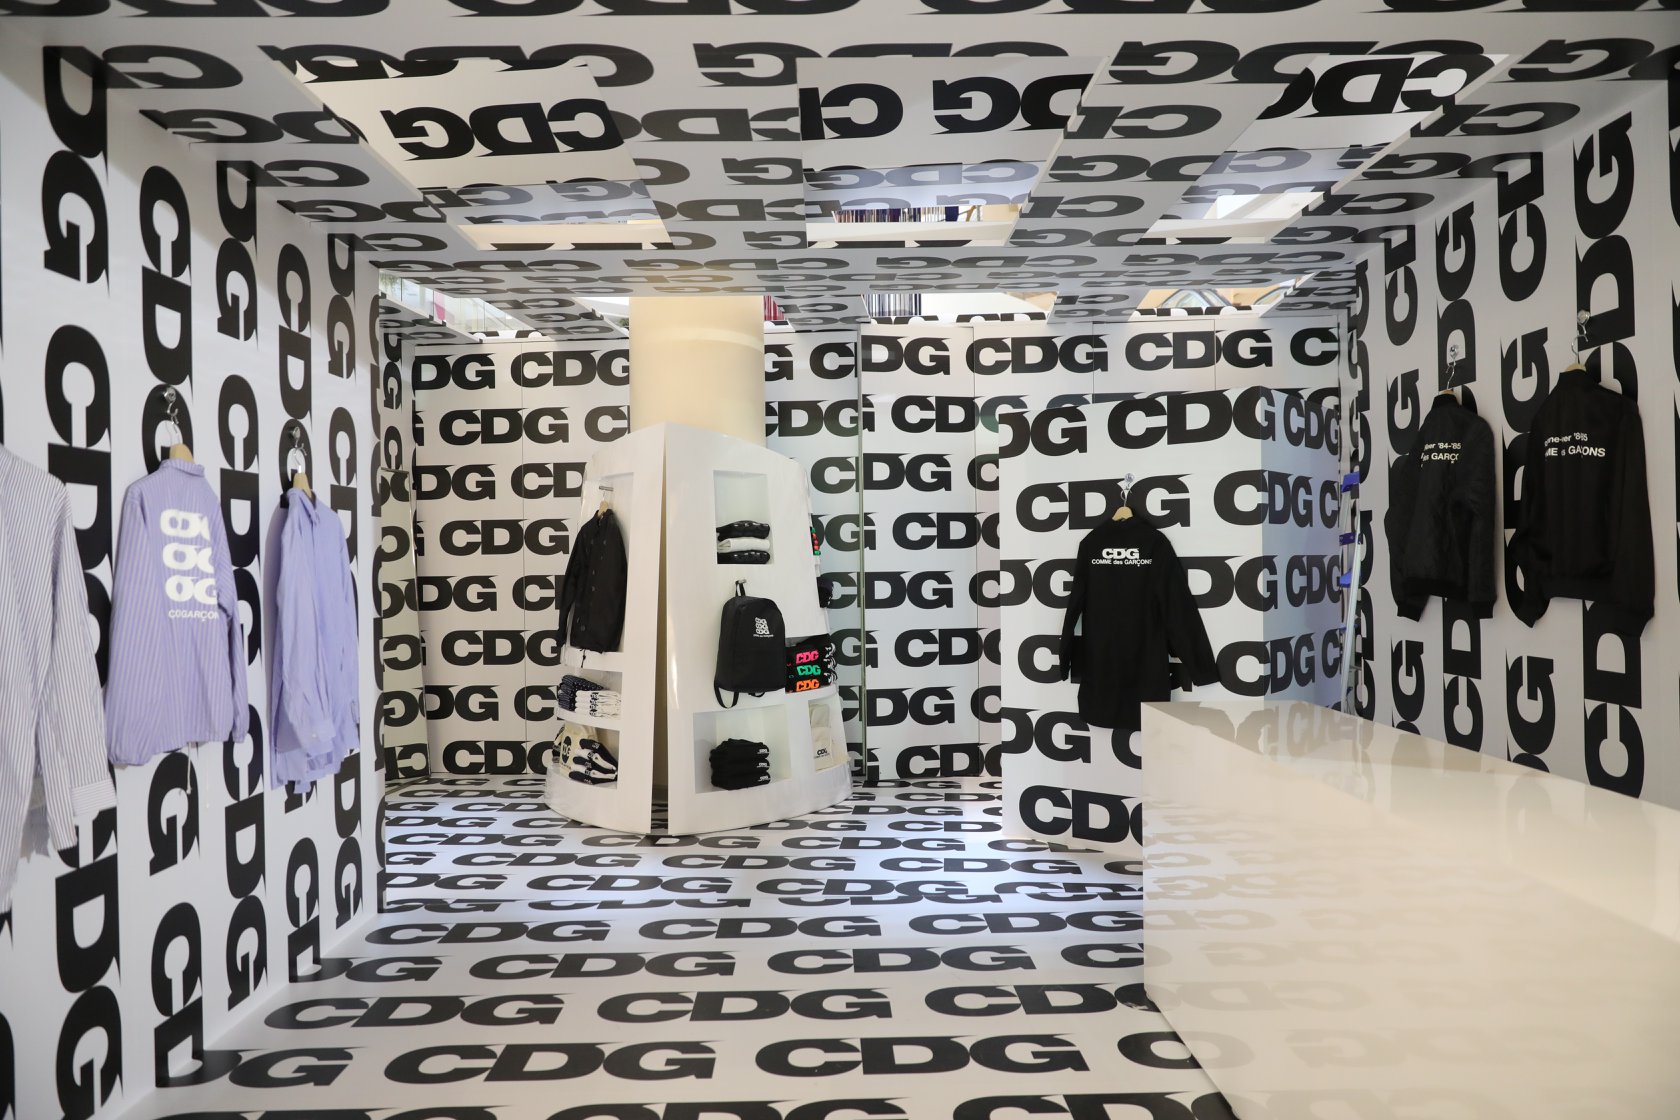 Come check out Comme des Garçons and CDG CDG CDG.